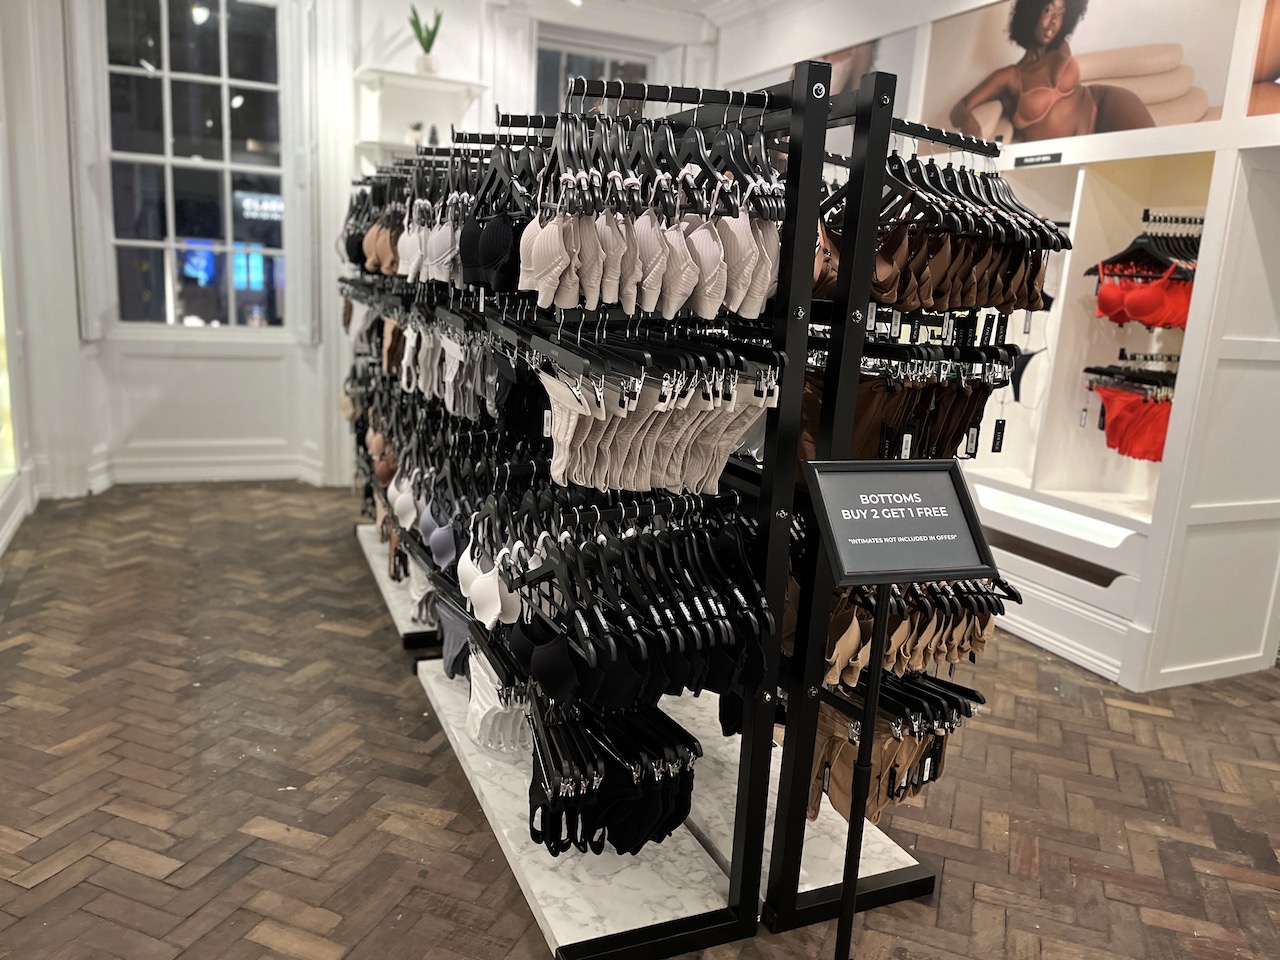 Comfort Made Sexy' lingerie brand Lounge has opened a week-long pop-up shop  on King Street with exclusive events - About Manchester